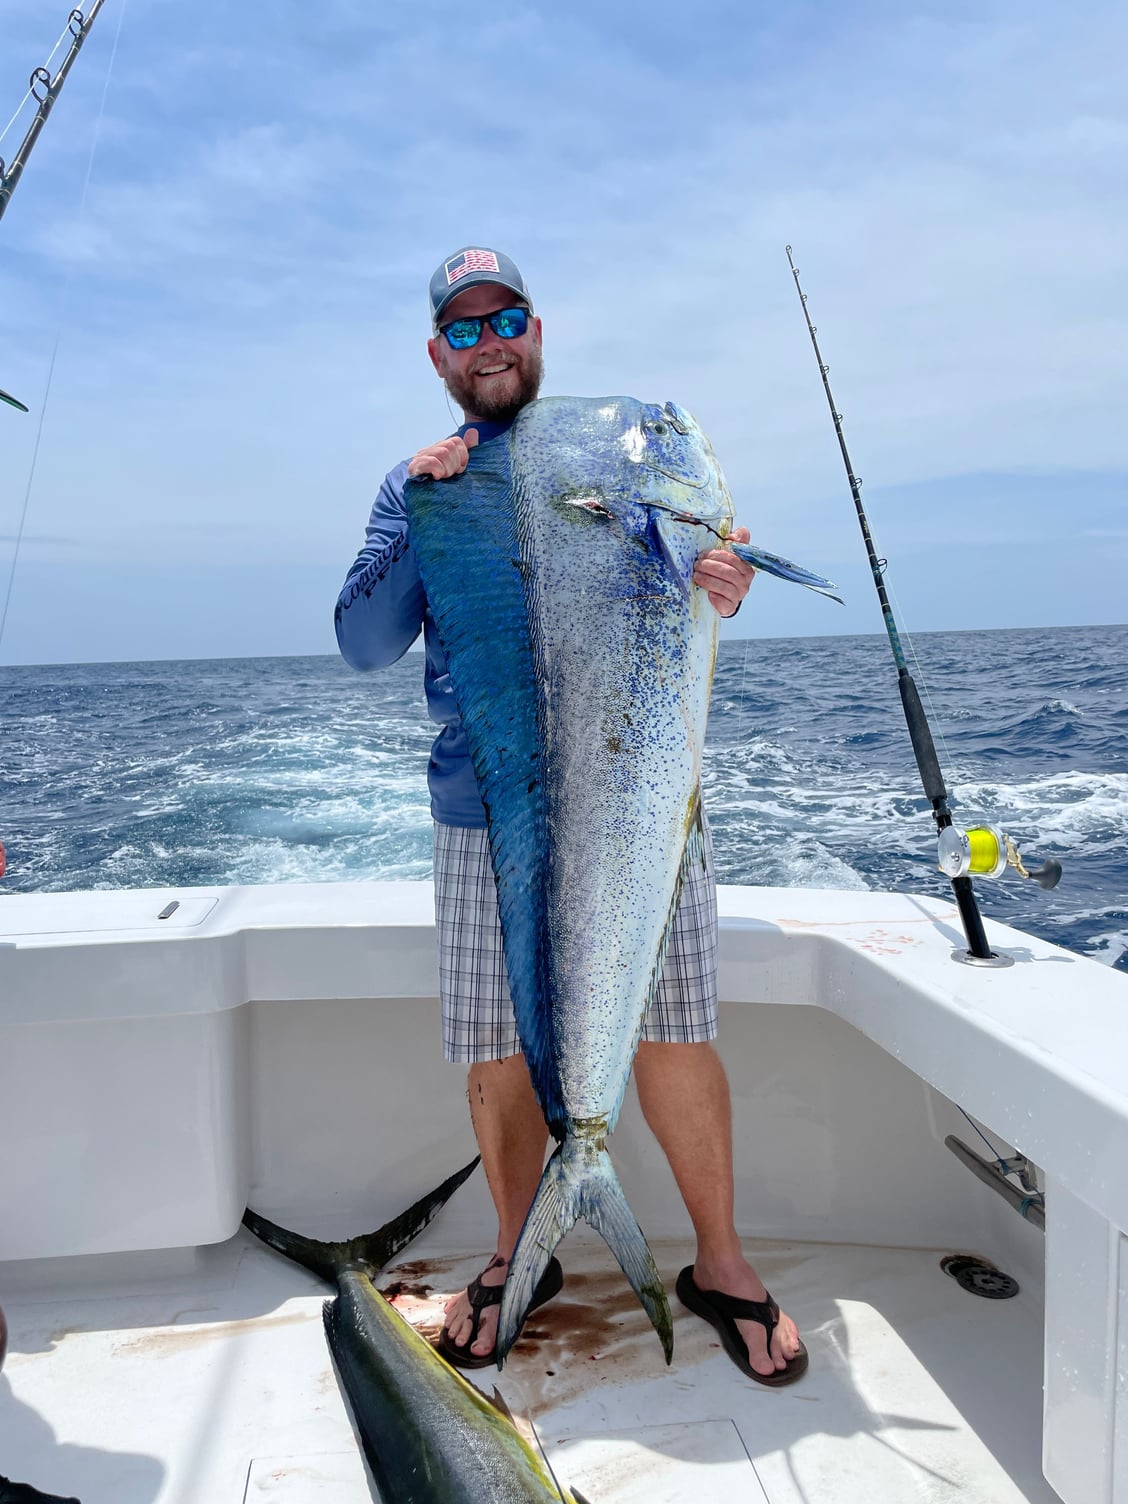 kingfish rod suggestions - The Hull Truth - Boating and Fishing Forum